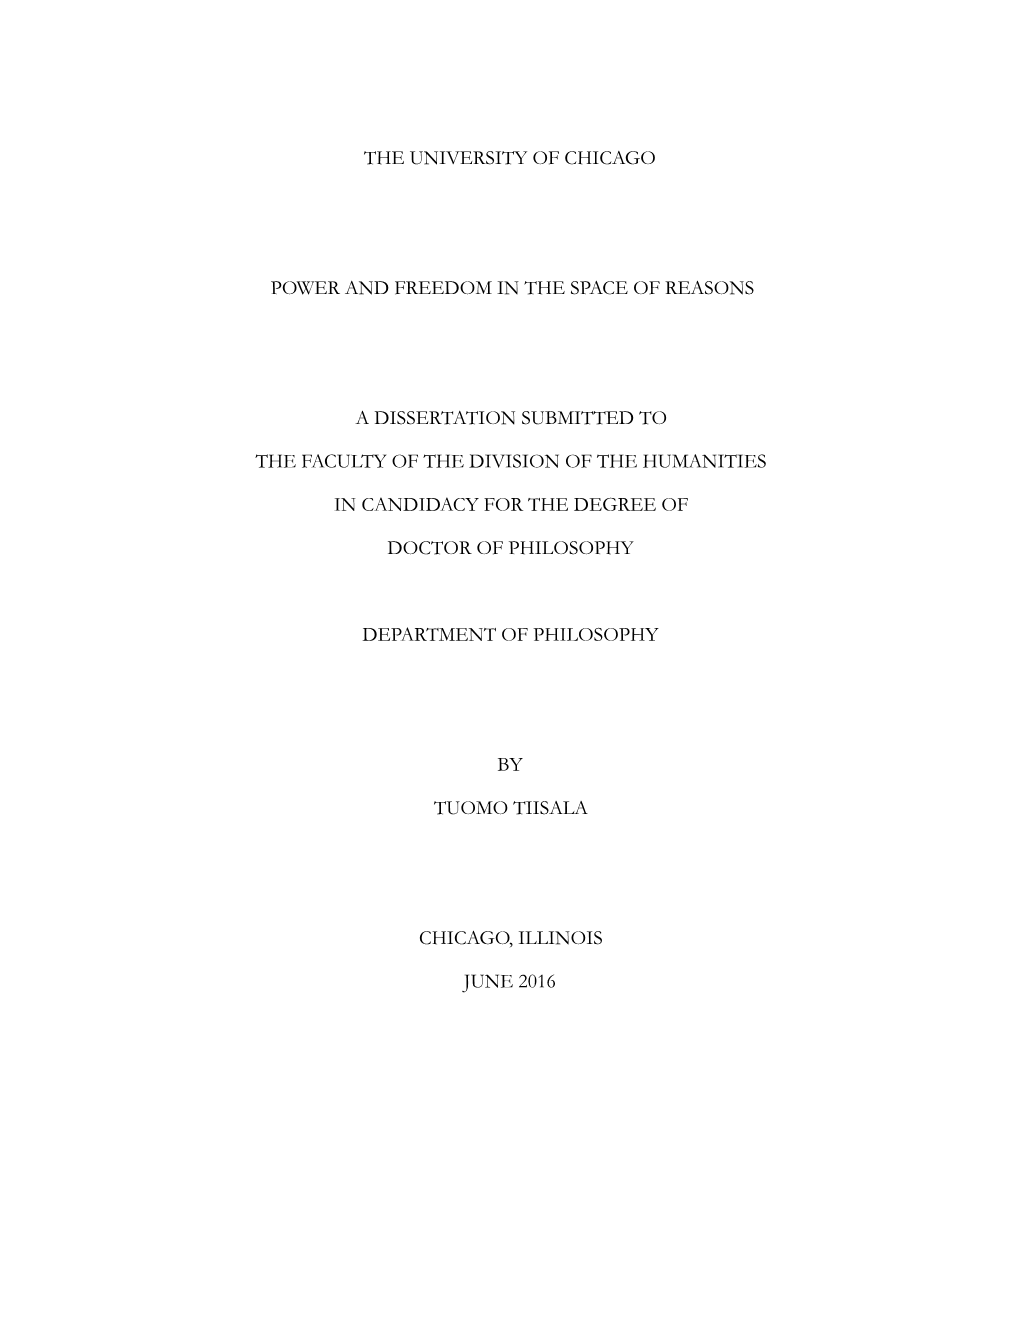 The University of Chicago Power and Freedom in the Space of Reasons a Dissertation Submitted to the Faculty of the Division O